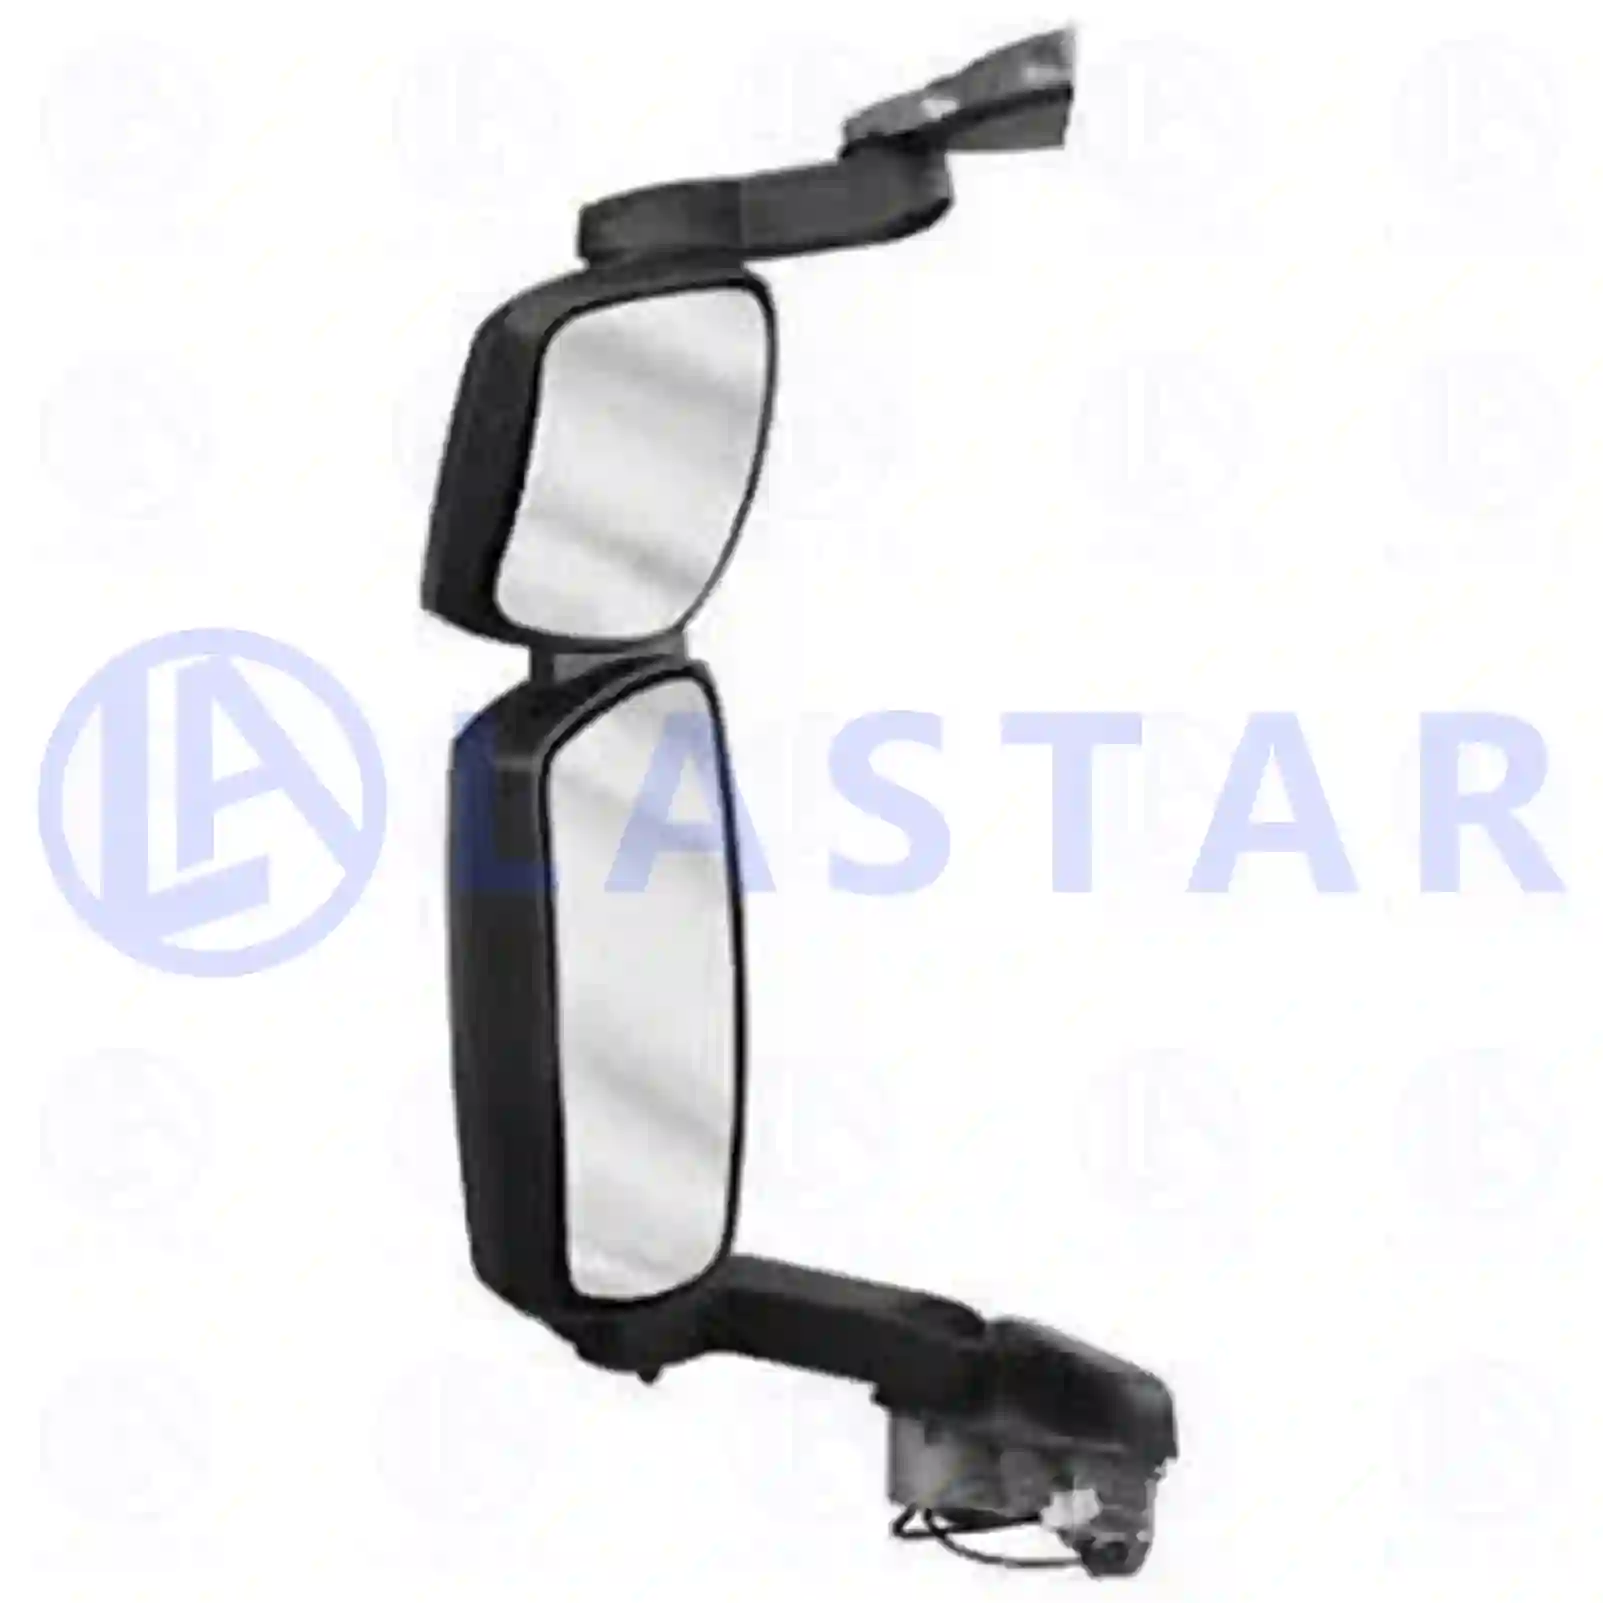 Main mirror, complete, right, heated, 77720824, 504150525, 580133 ||  77720824 Lastar Spare Part | Truck Spare Parts, Auotomotive Spare Parts Main mirror, complete, right, heated, 77720824, 504150525, 580133 ||  77720824 Lastar Spare Part | Truck Spare Parts, Auotomotive Spare Parts